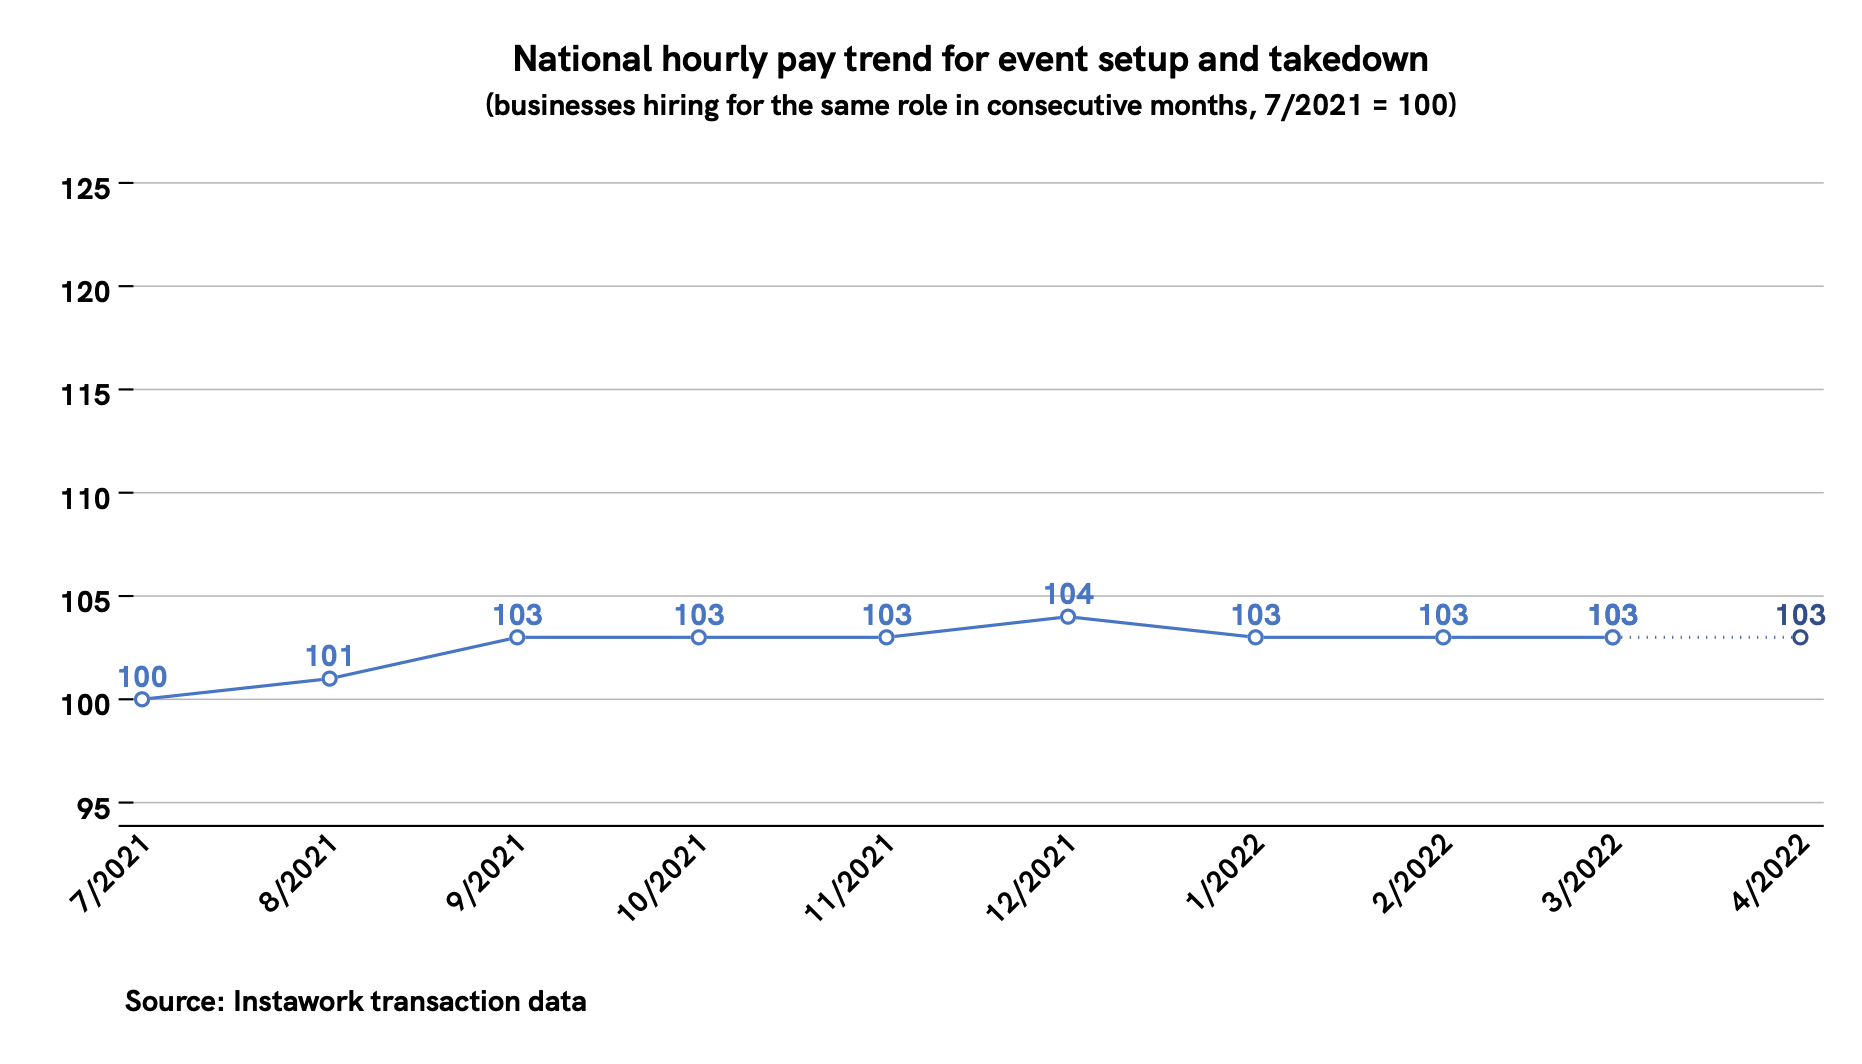 28 Mar 2022 pay trend for event setup and takedown